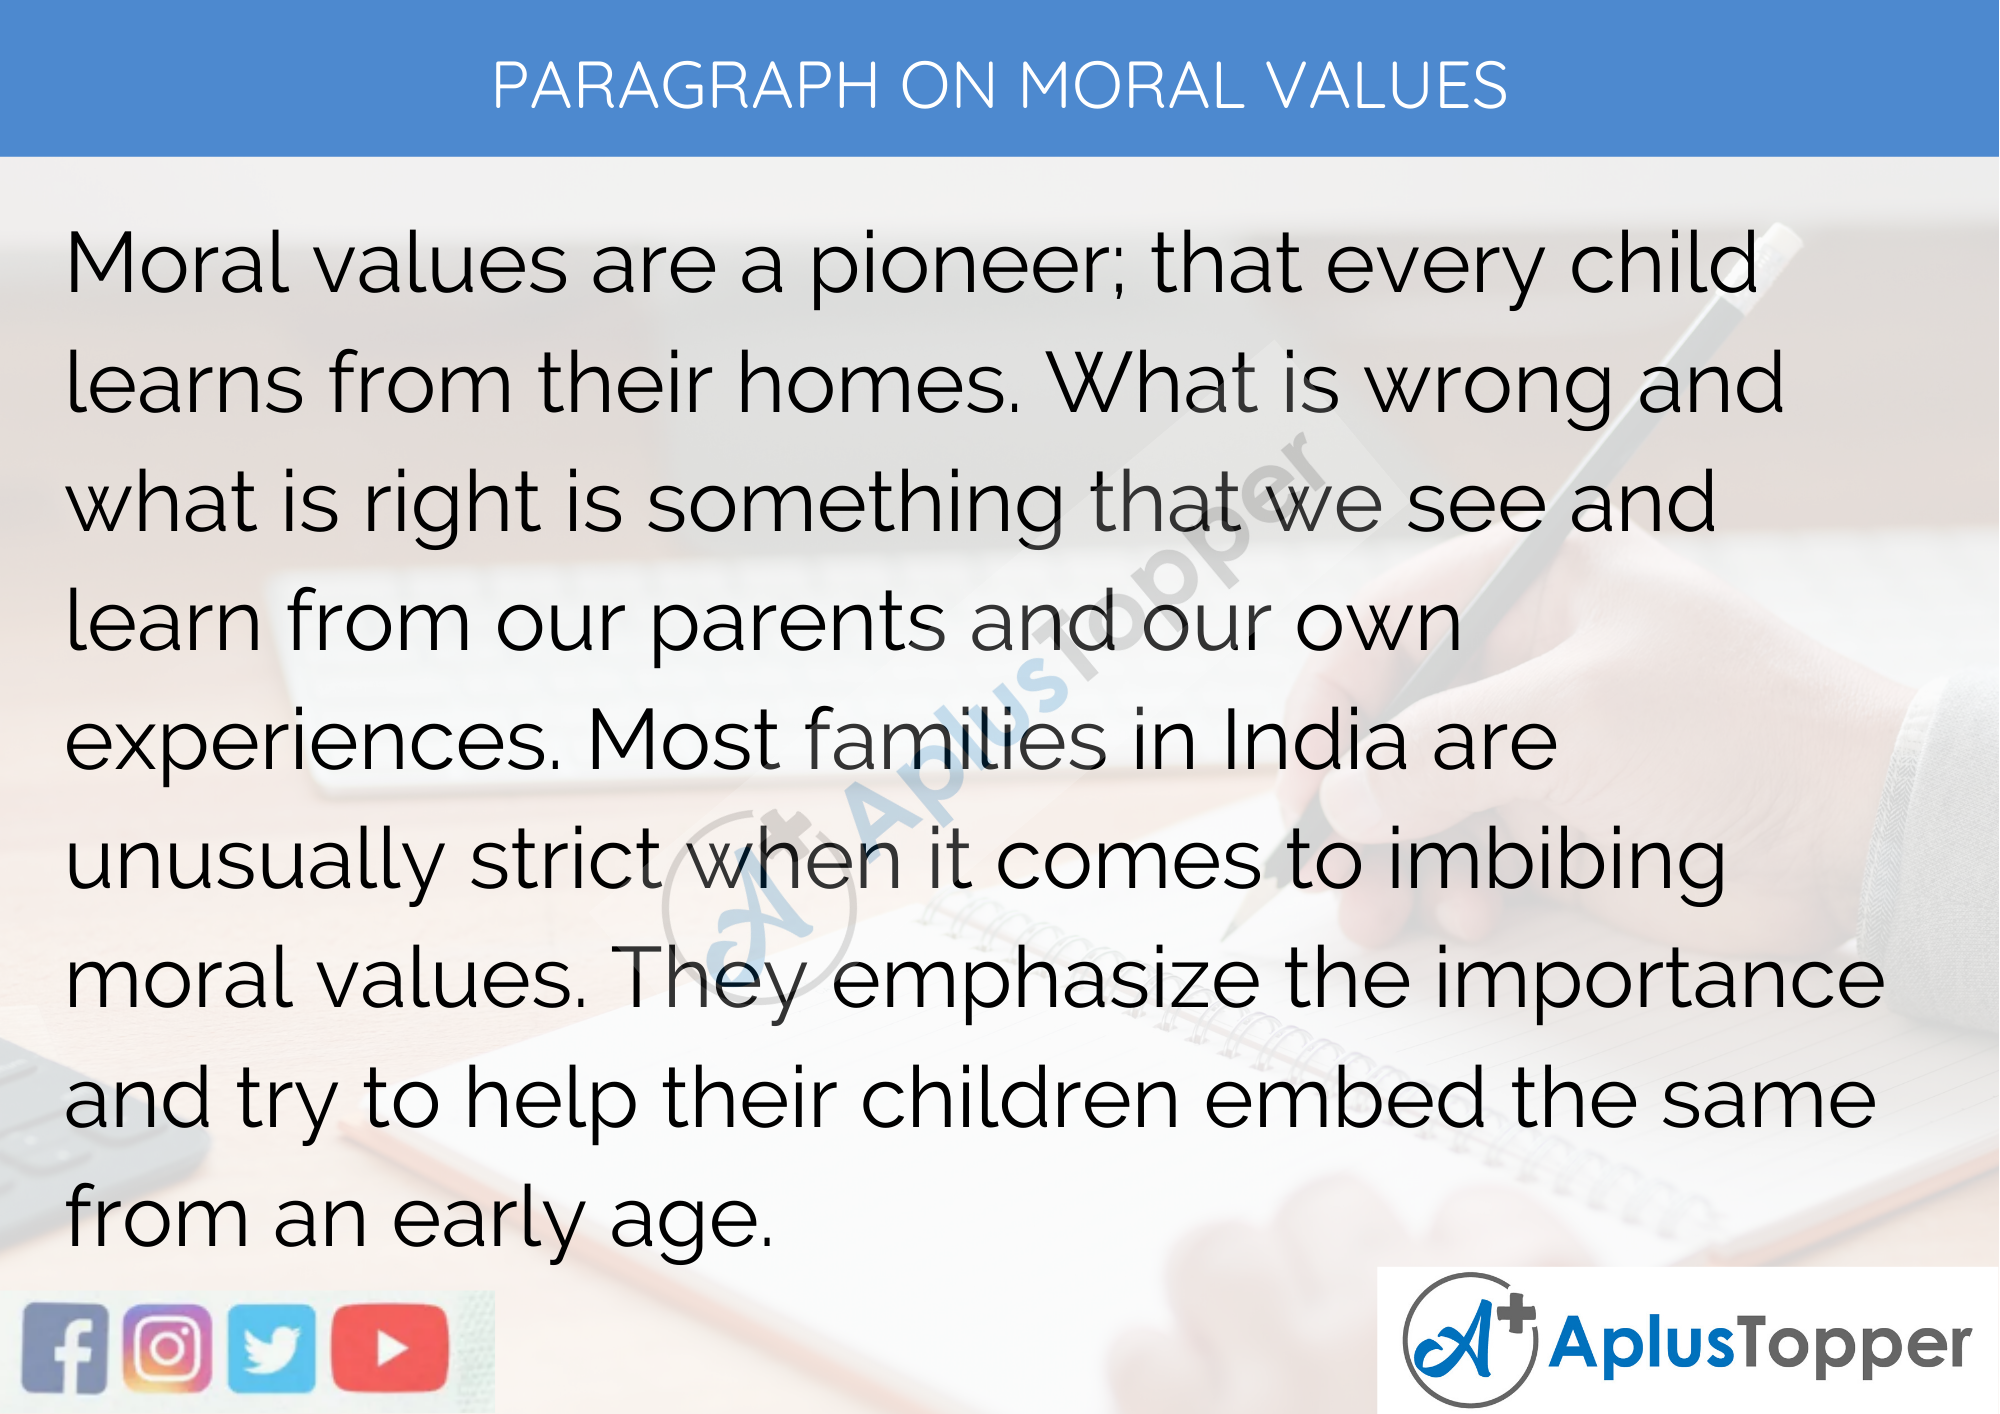 Paragraph on Moral Values - 100 Words for Classes 1, 2, and 3 Kids